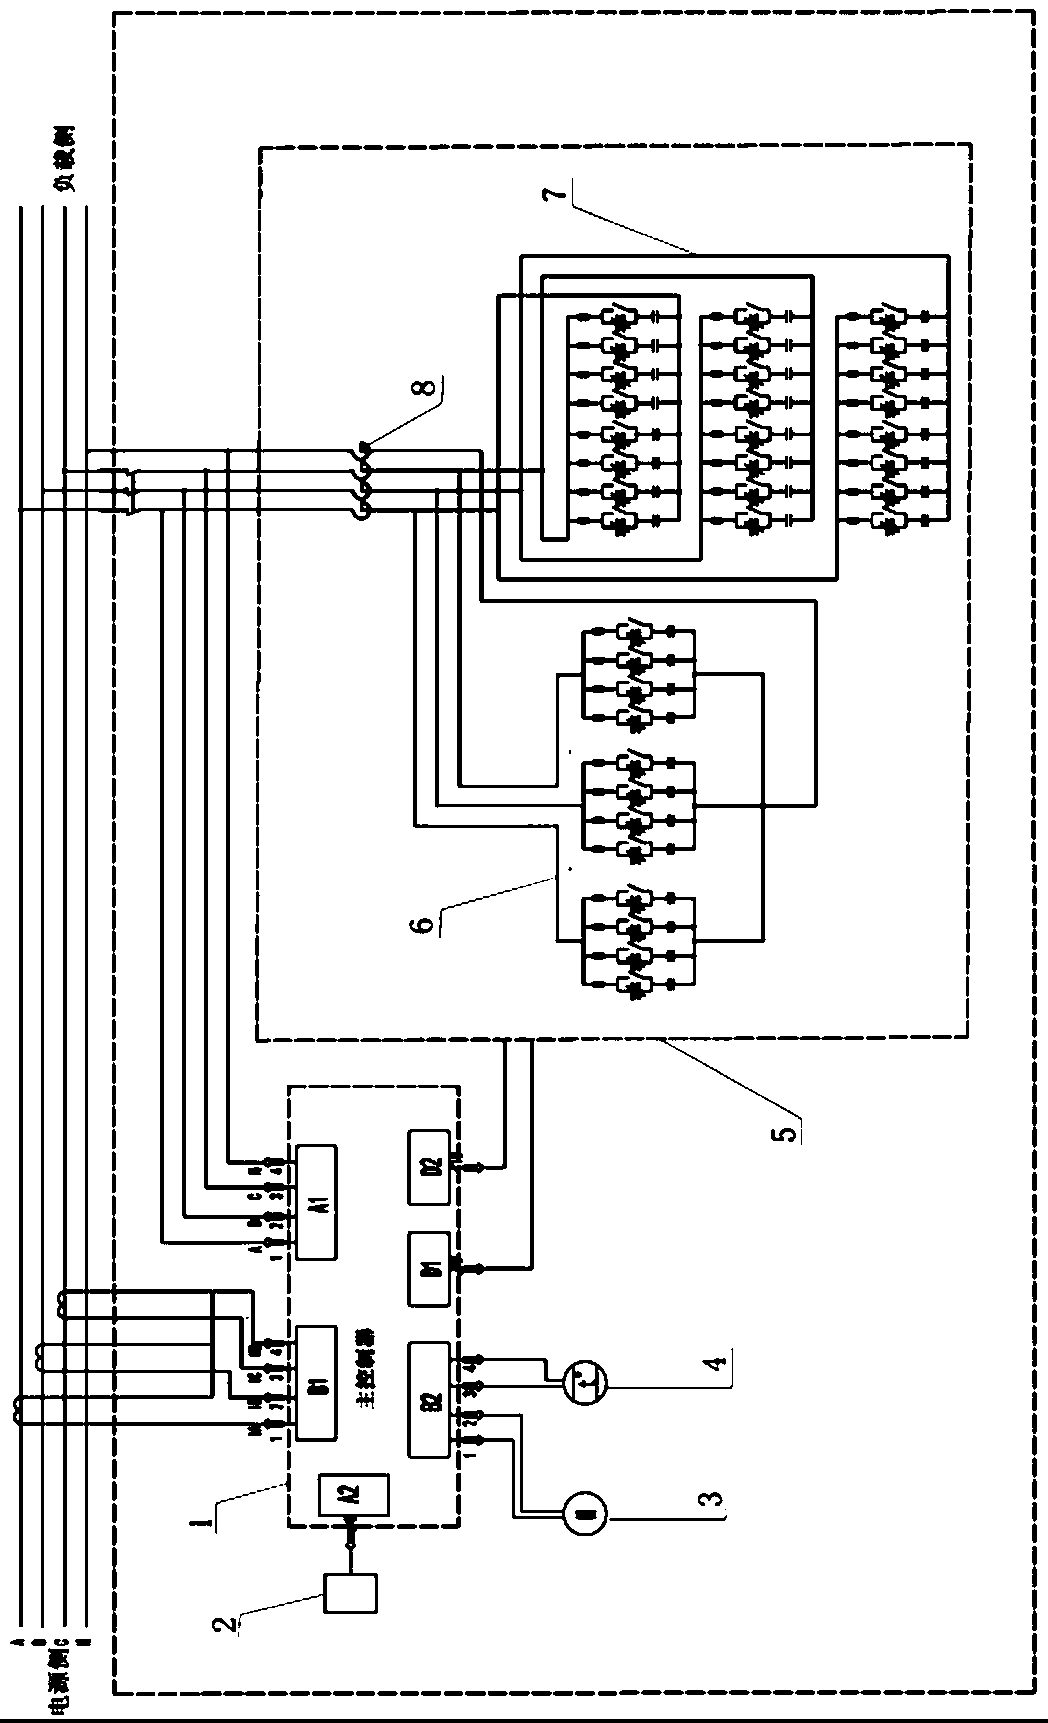 Device and method for three-phase unbalance and reactive power treatment of phase-to-phase capacitance